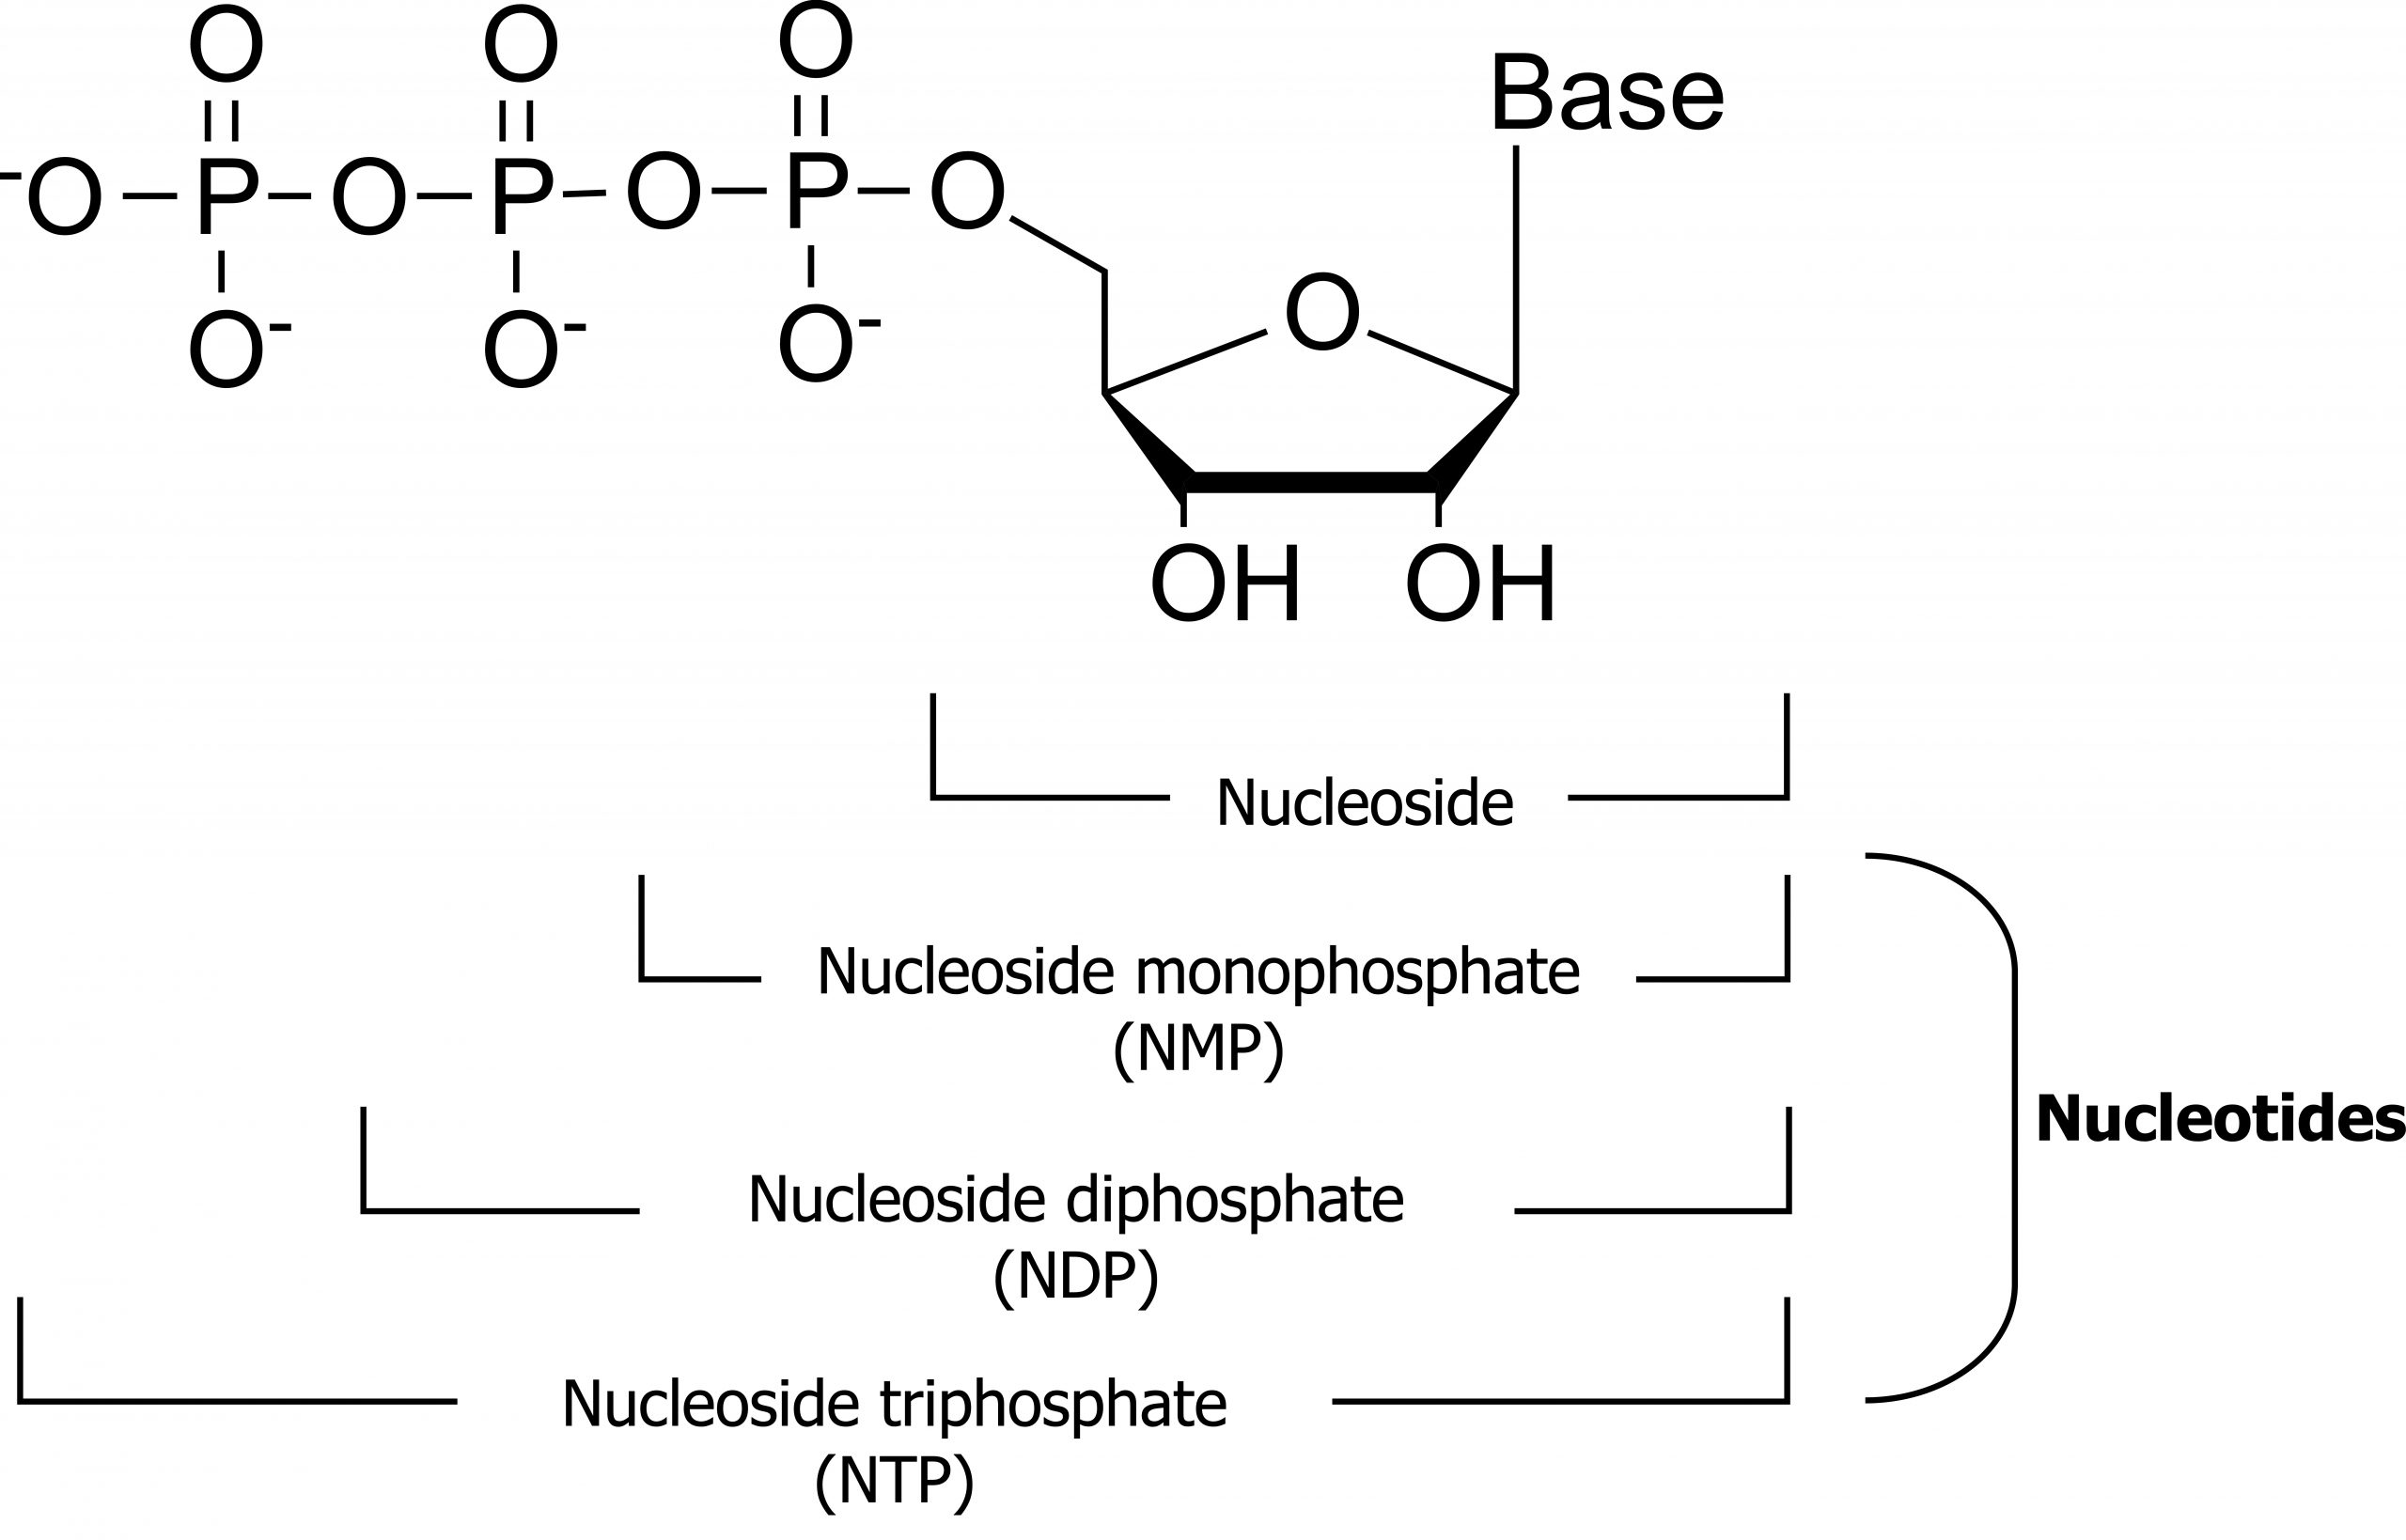 Pentagon shaped 5-carbon sugar with oxygen at top, position 1 carbon and base, position 2 carbon and OH group, position 3 carbon and OH group, position 4 carbon attached to 3 phosphate groups. Nucleoside contains the sugar and base. Nucleoside monophosphate (NMP) contains the sugar, base, and one phosphate group. Nucleoside diphosphate (NDP) contains the sugar, base, and two phosphate groups. Nucleoside triphosphate (NTP) contains the sugar, base, and three phosphate groups. NMP, NDP, and NTP are nucleotides.